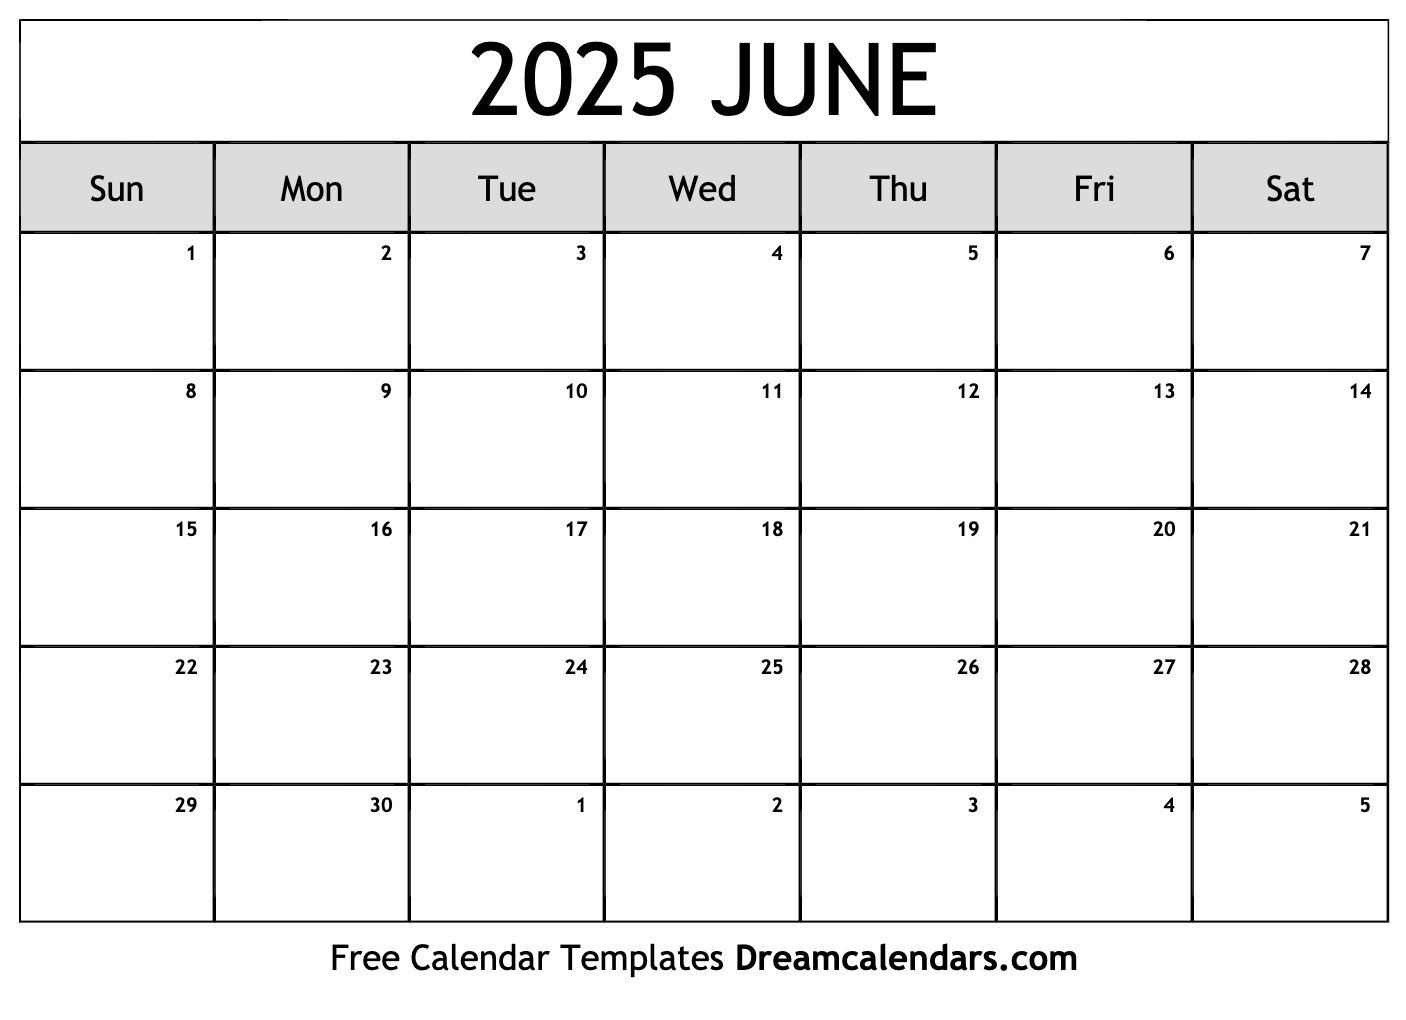 June 2025 Calendar - Free Printable With Holidays And Observances for Month Of June 2025 Calendar